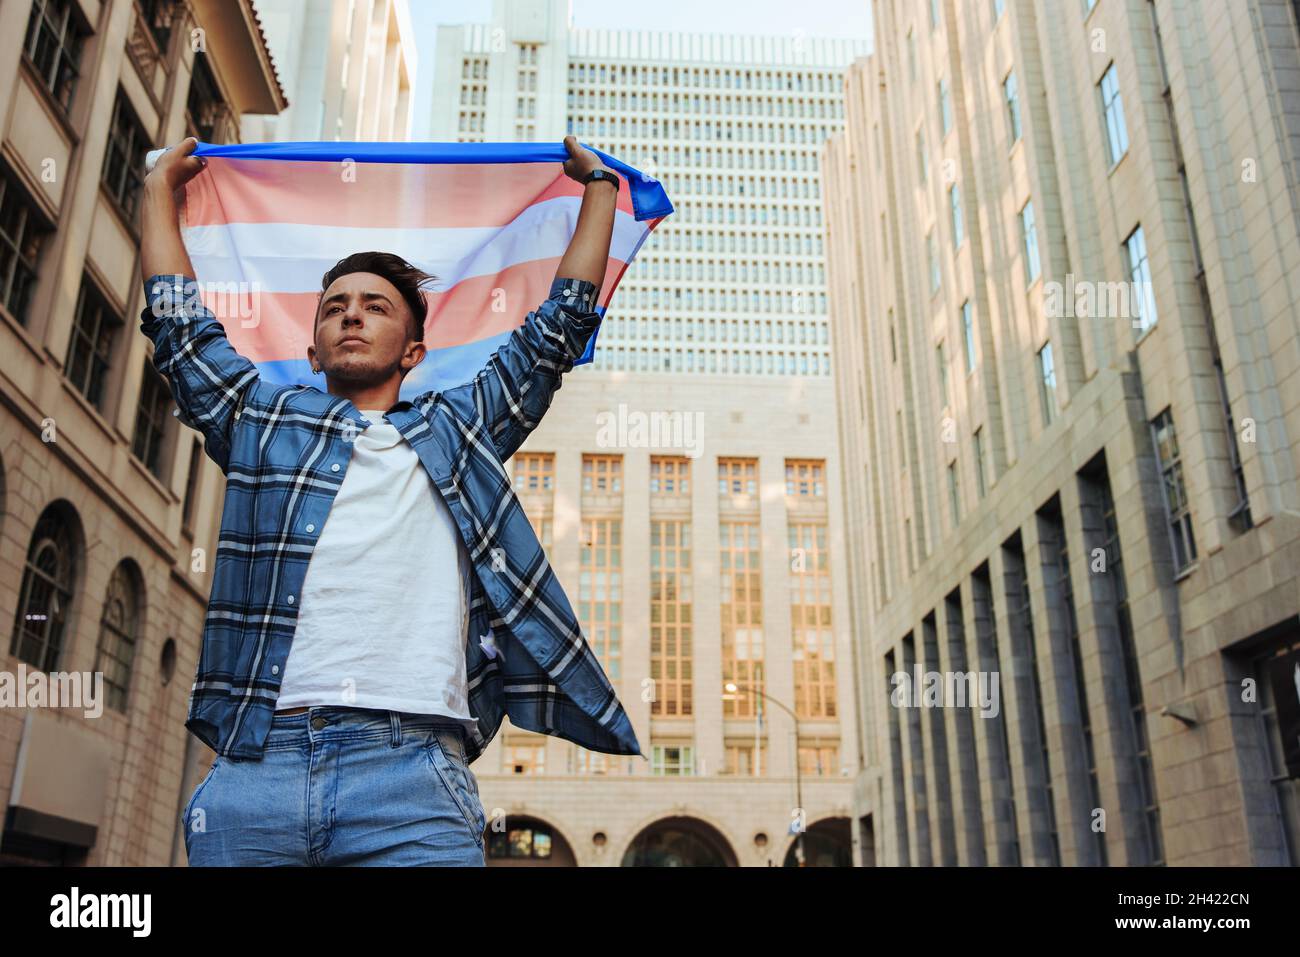 Nonconforming man raising the transgender flag outdoors. Confident young transgender man celebrating gay pride in the city. Young gender nonconforming Stock Photo